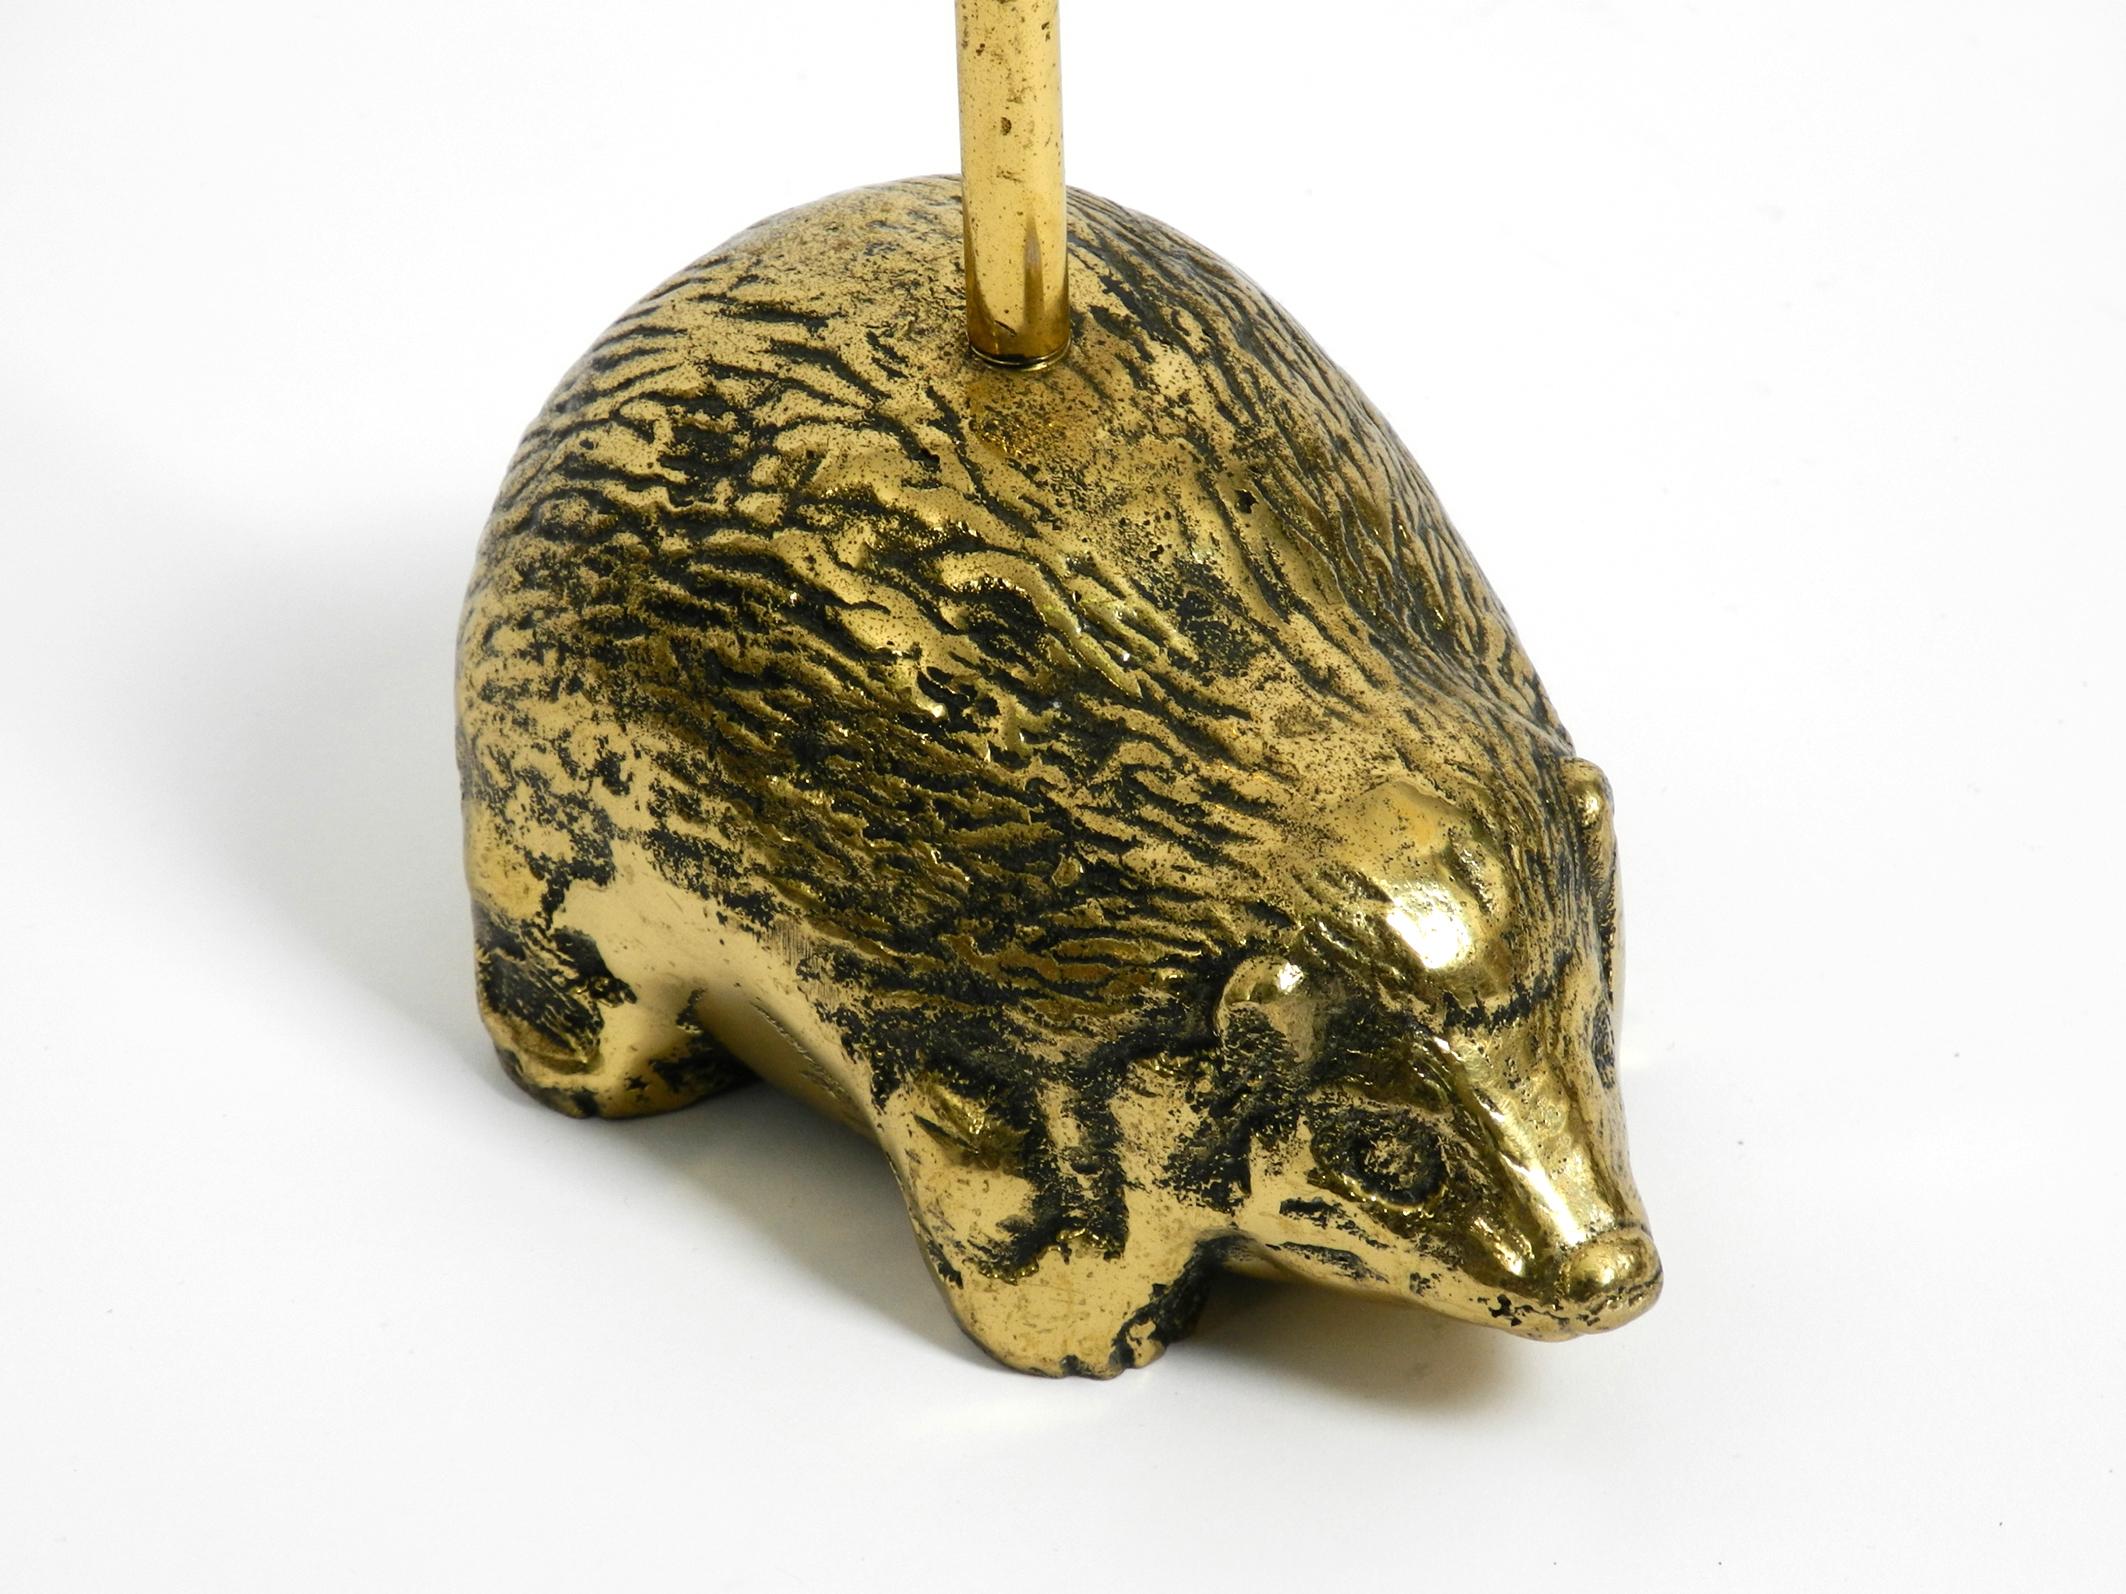 Rare, Very Heavy 1960s Doorstop Made of Solid Brass in the Shape of a Hedgehog 5